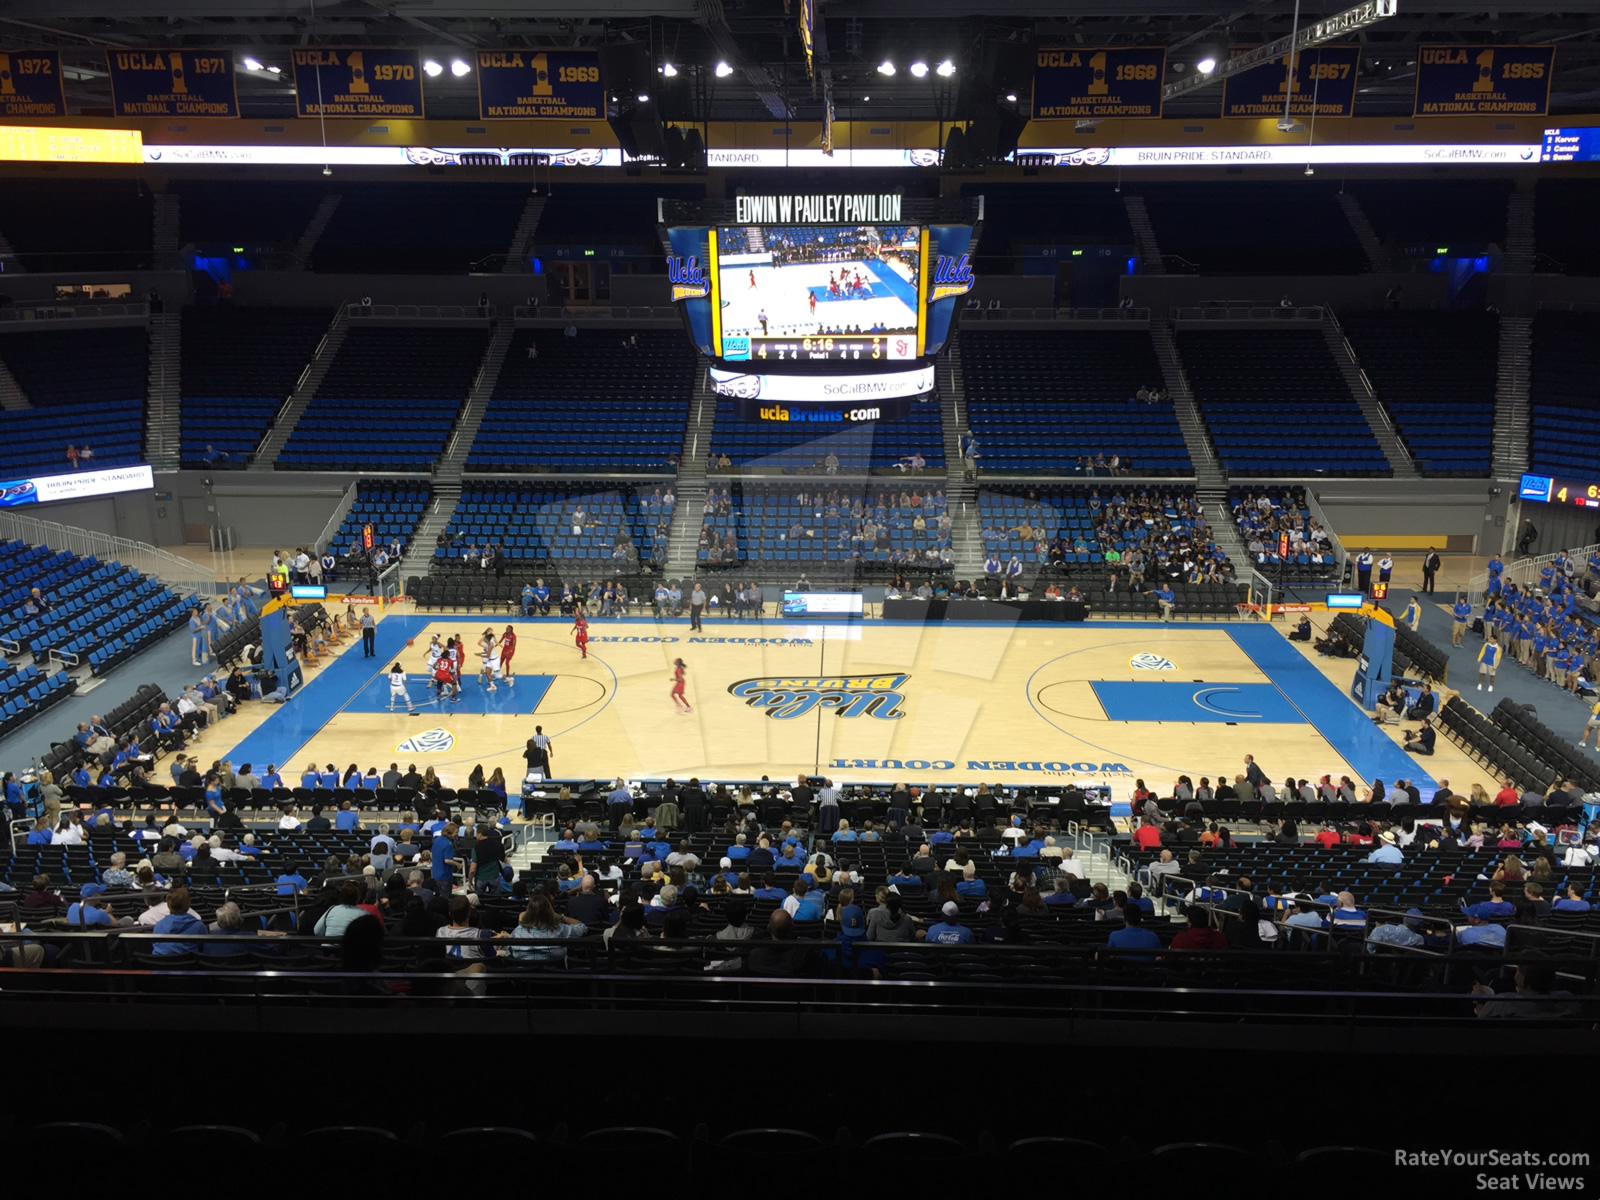 section 202, row 6 seat view  - pauley pavilion